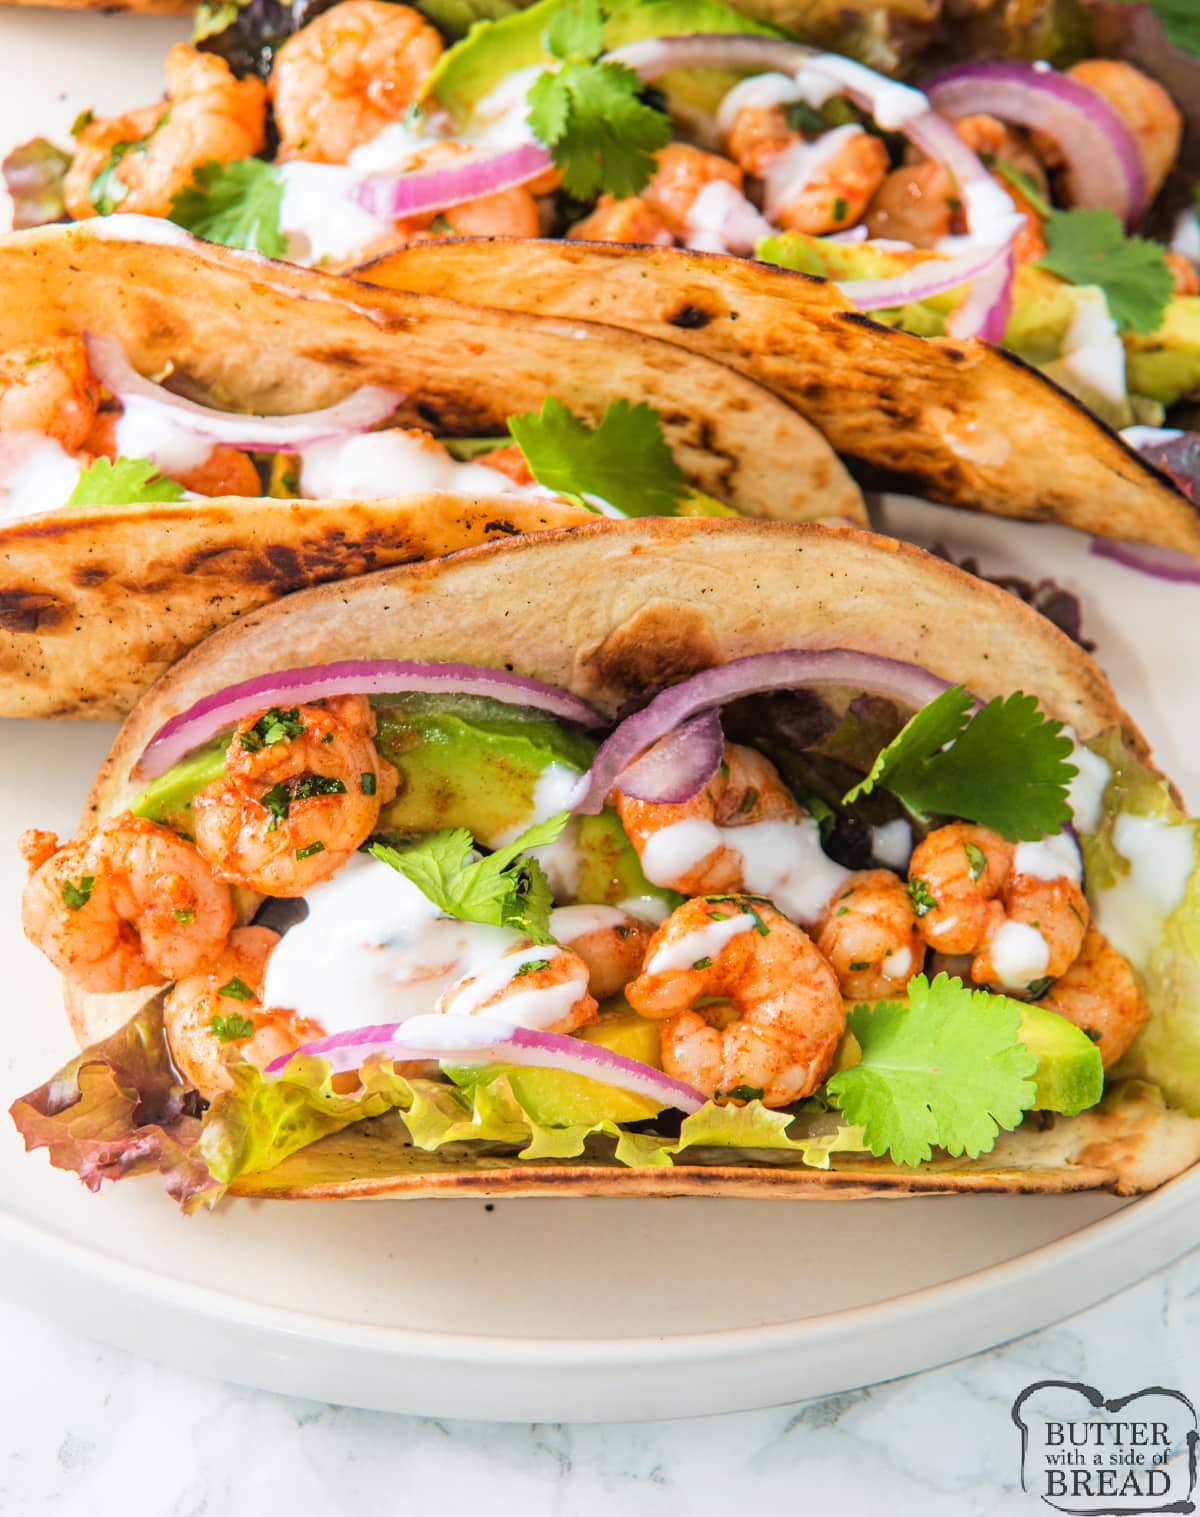 Spicy Shrimp Tacos are juicy and packed with flavor. Quick and easy dinner recipe that is ready to eat in less than 15 minutes!